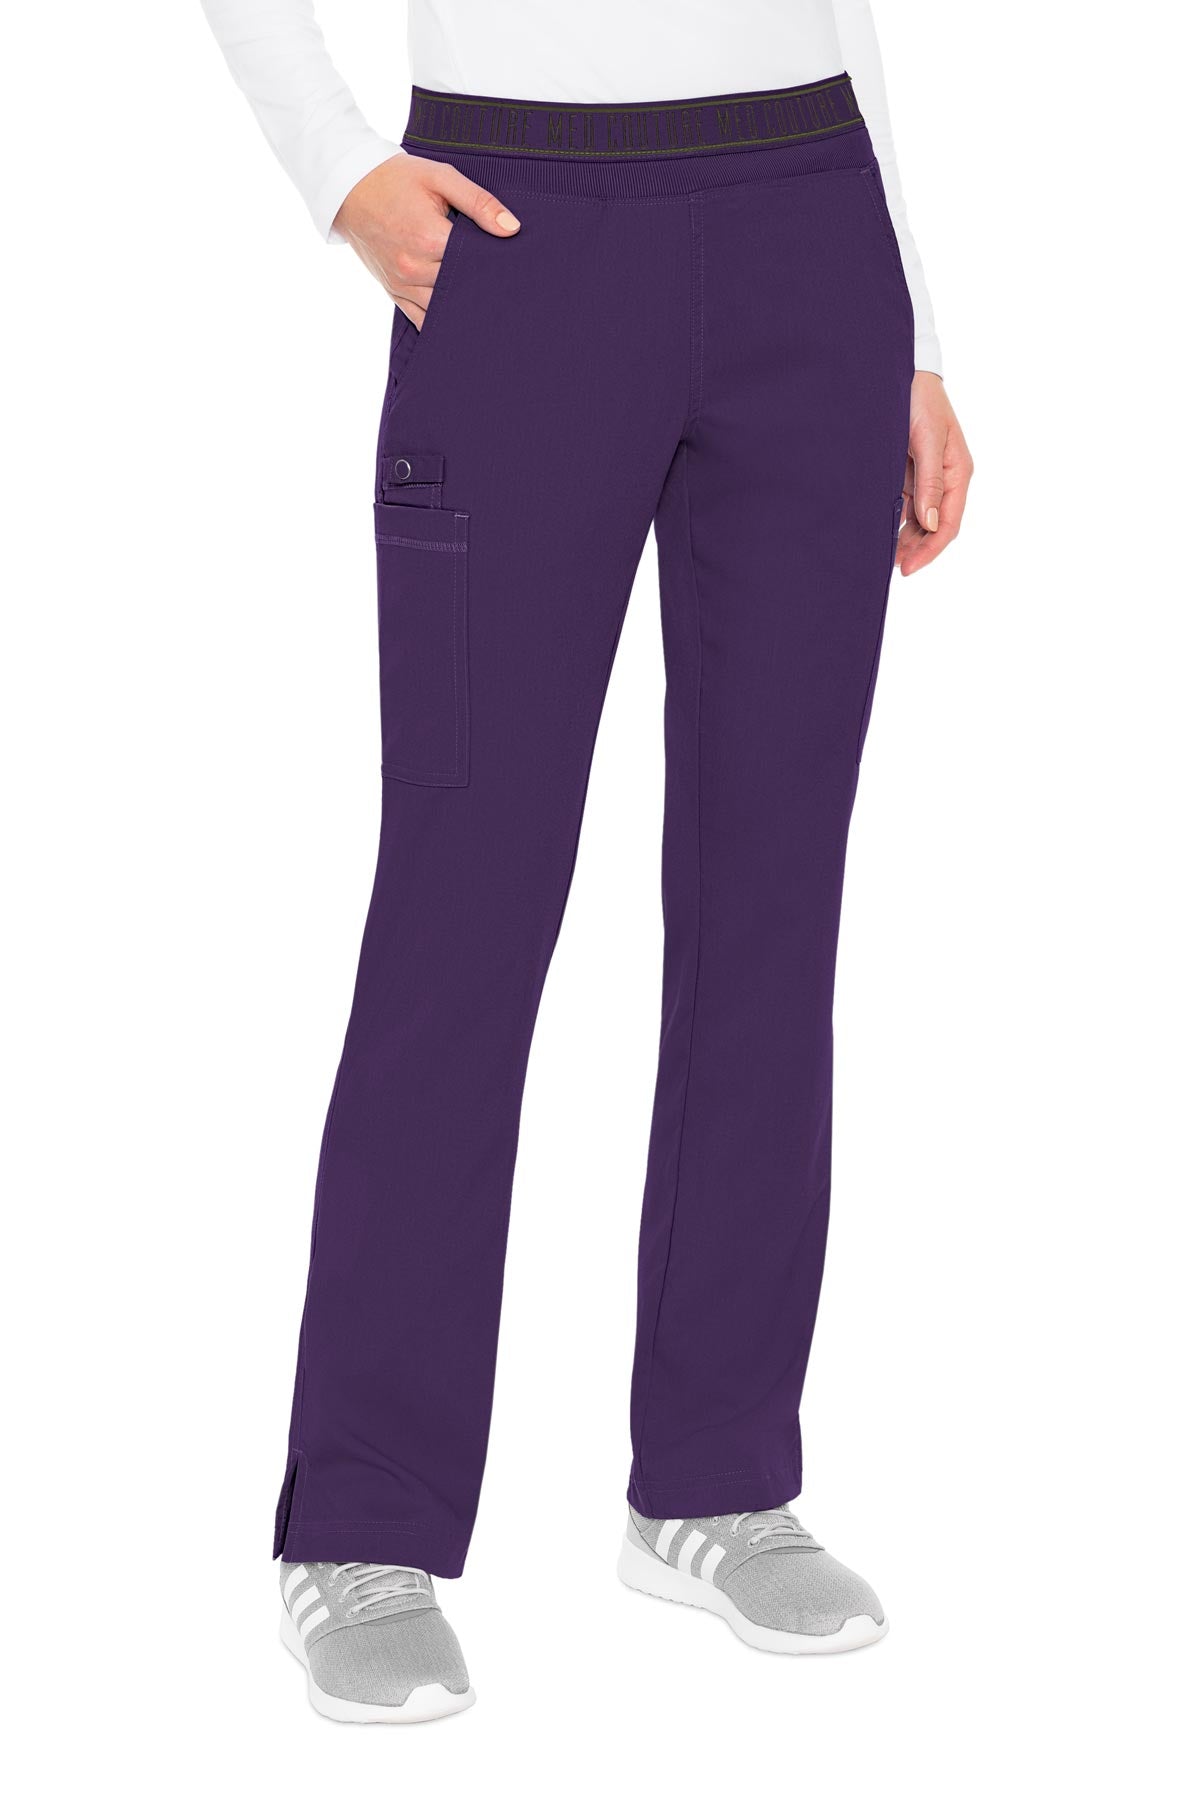 Med Couture Eggplant PANT